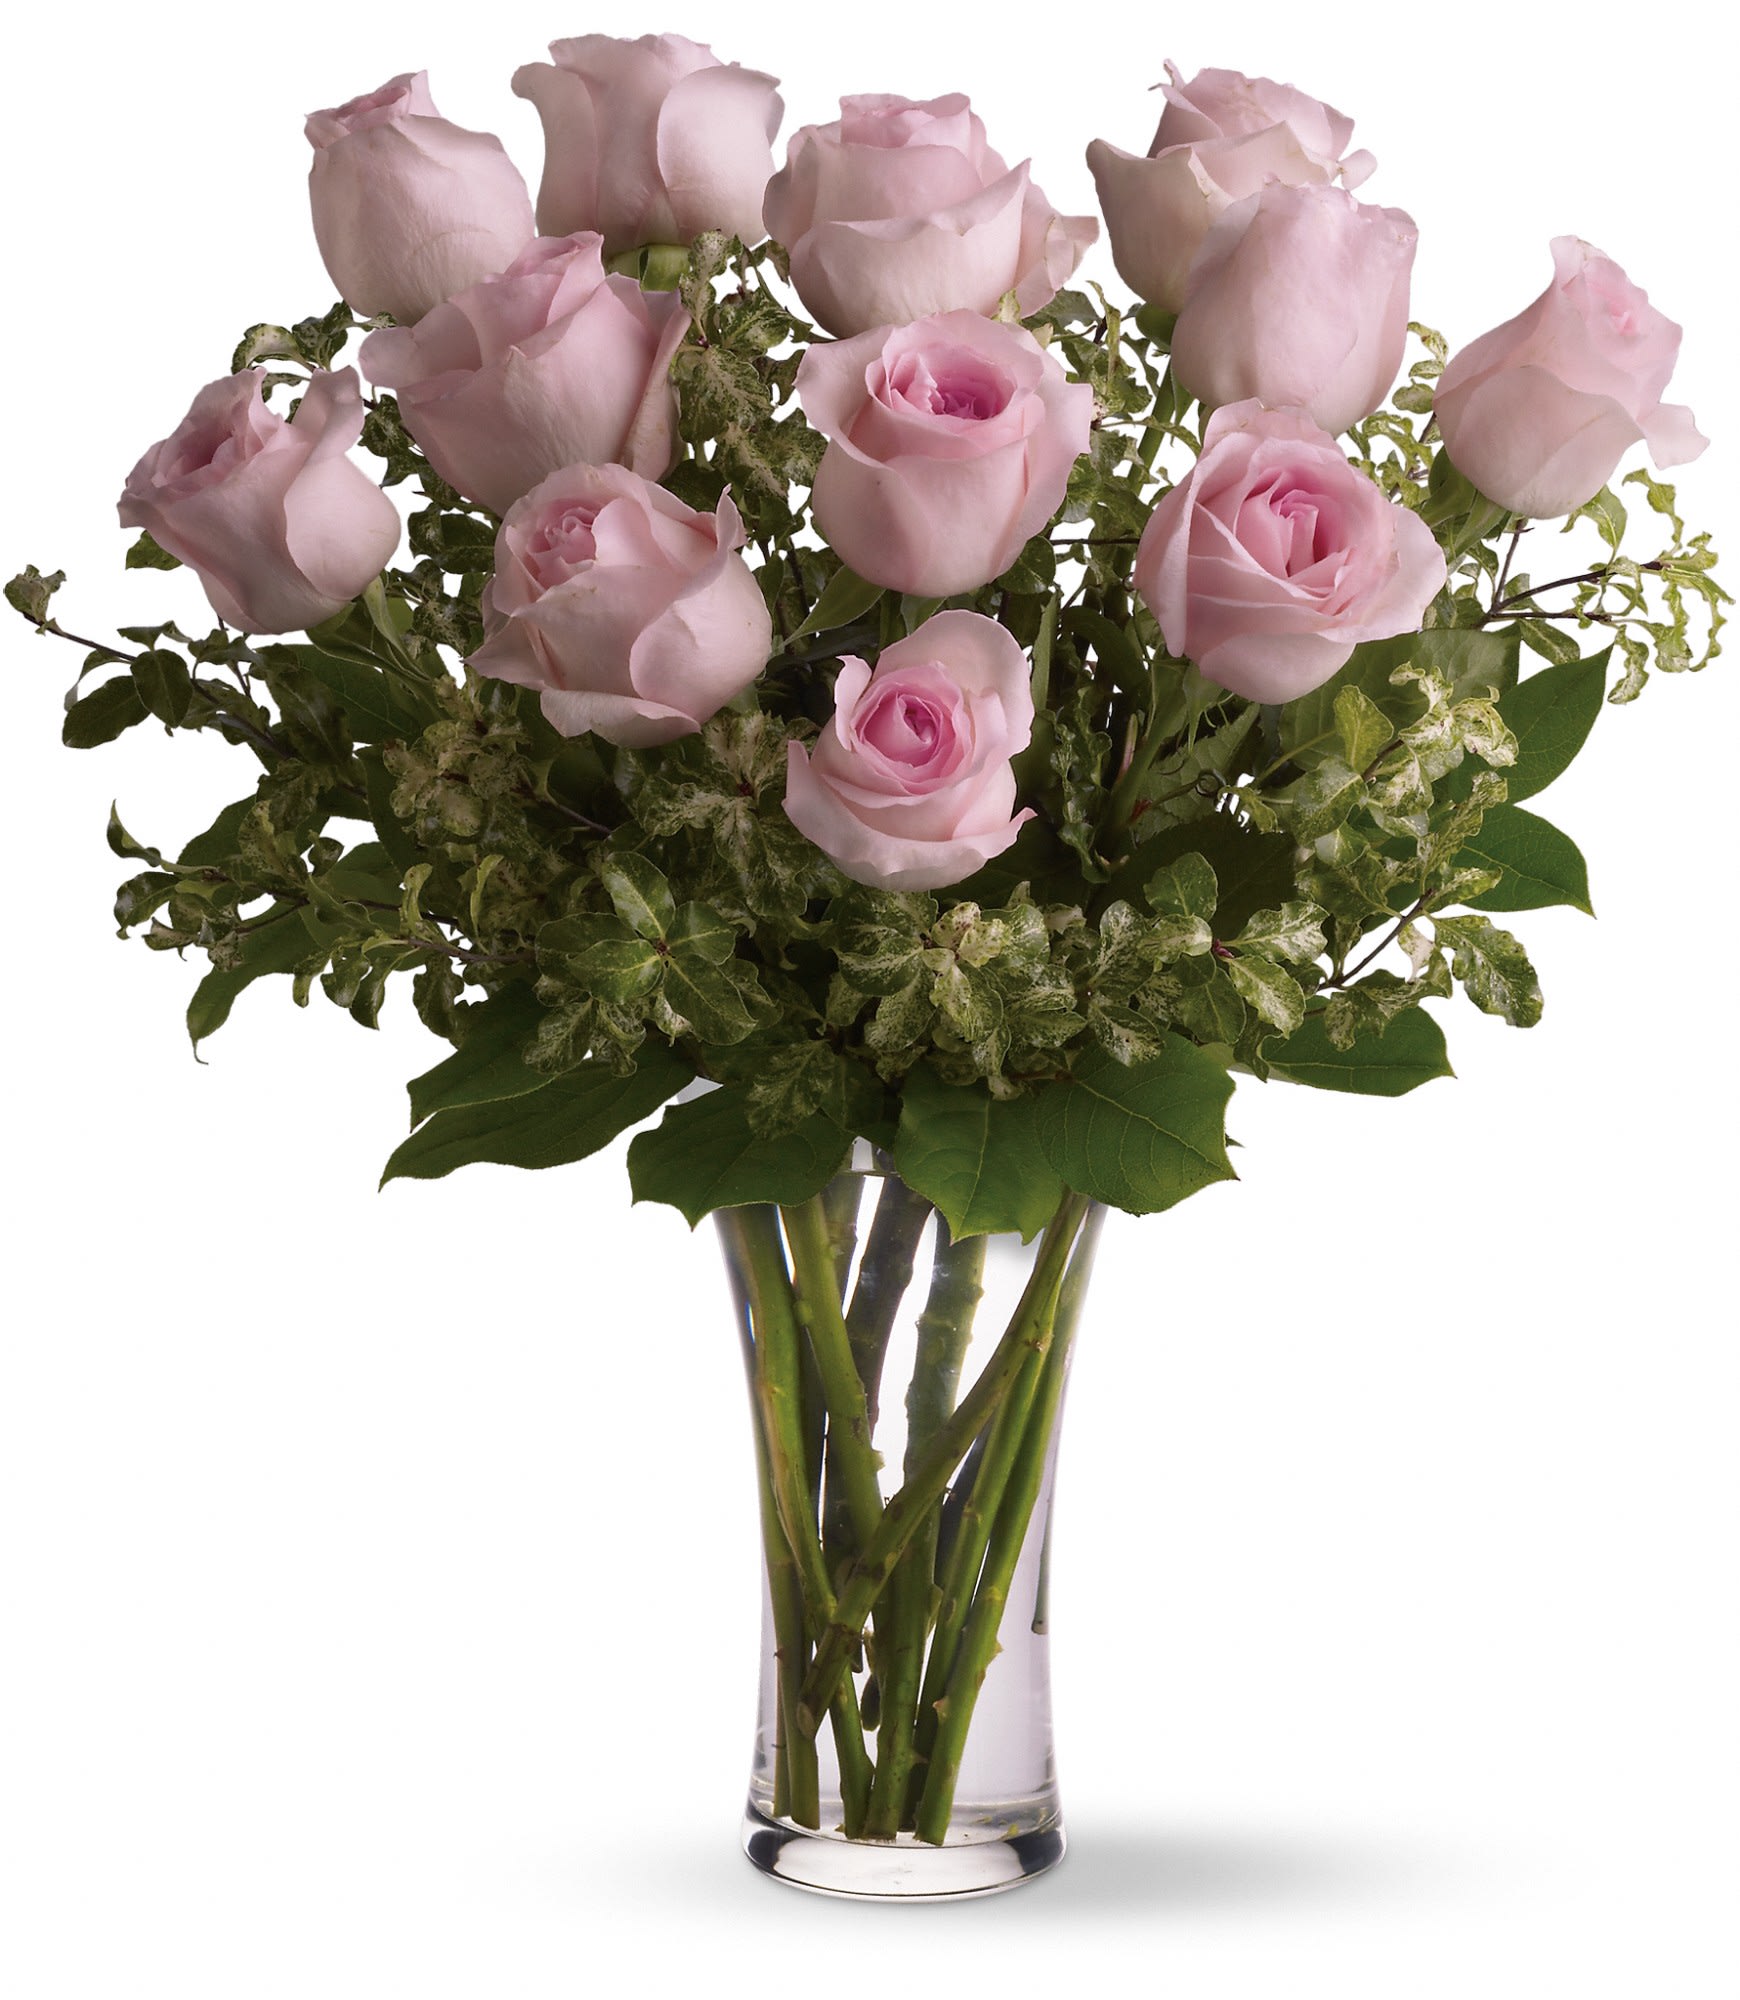 1 Dozen Pink Roses- call for other colors or mixture of colors - A dozen pink roses with variegated pittosporum and salal in a beautiful glass vase. Approximately 16&quot; W x 20&quot; H. TF33-1